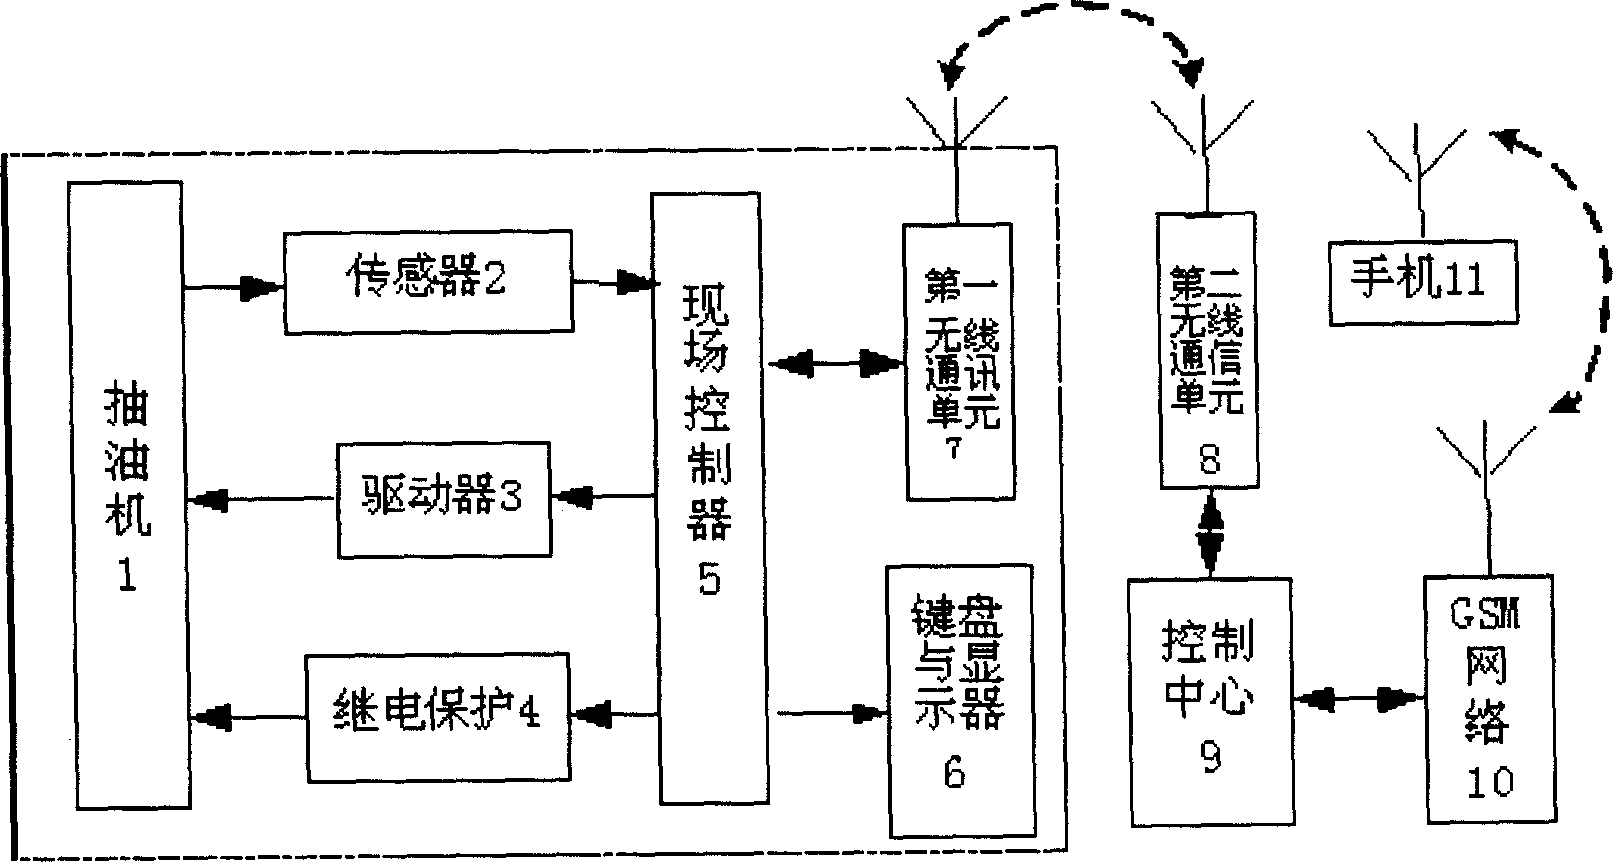 Energy saving system of networked measuring and controlling pumping units